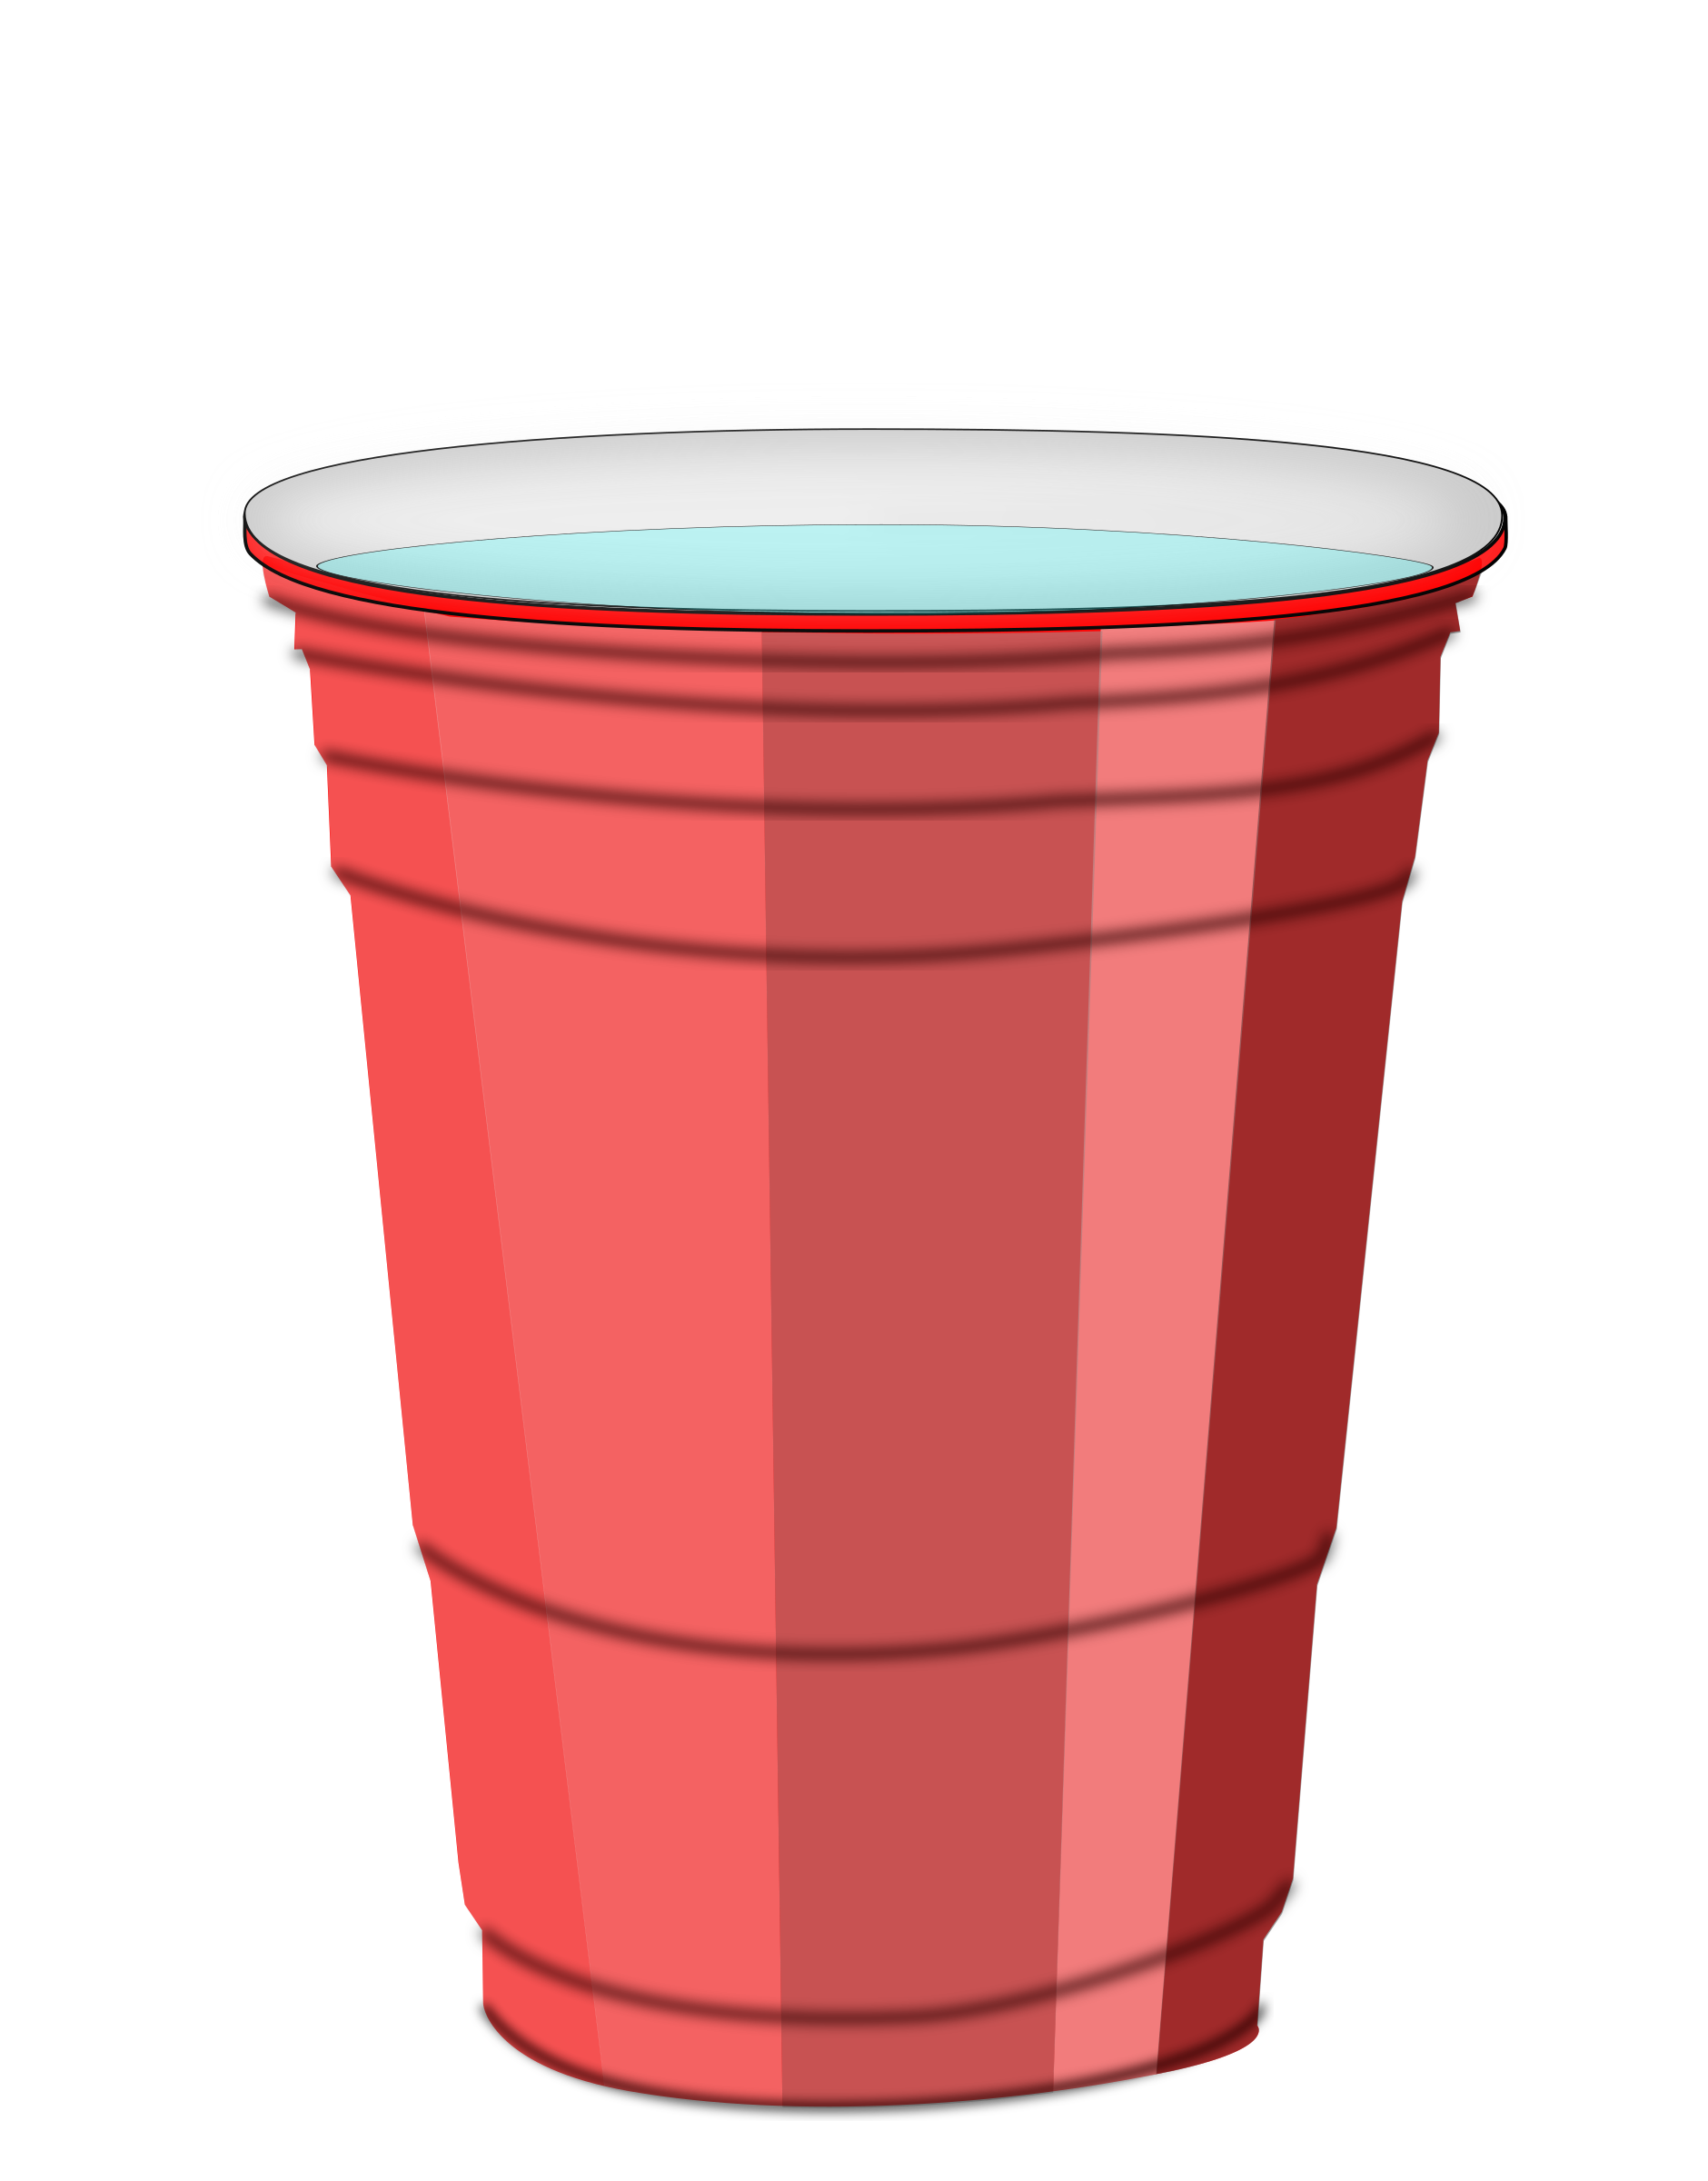 cups clipart water cup